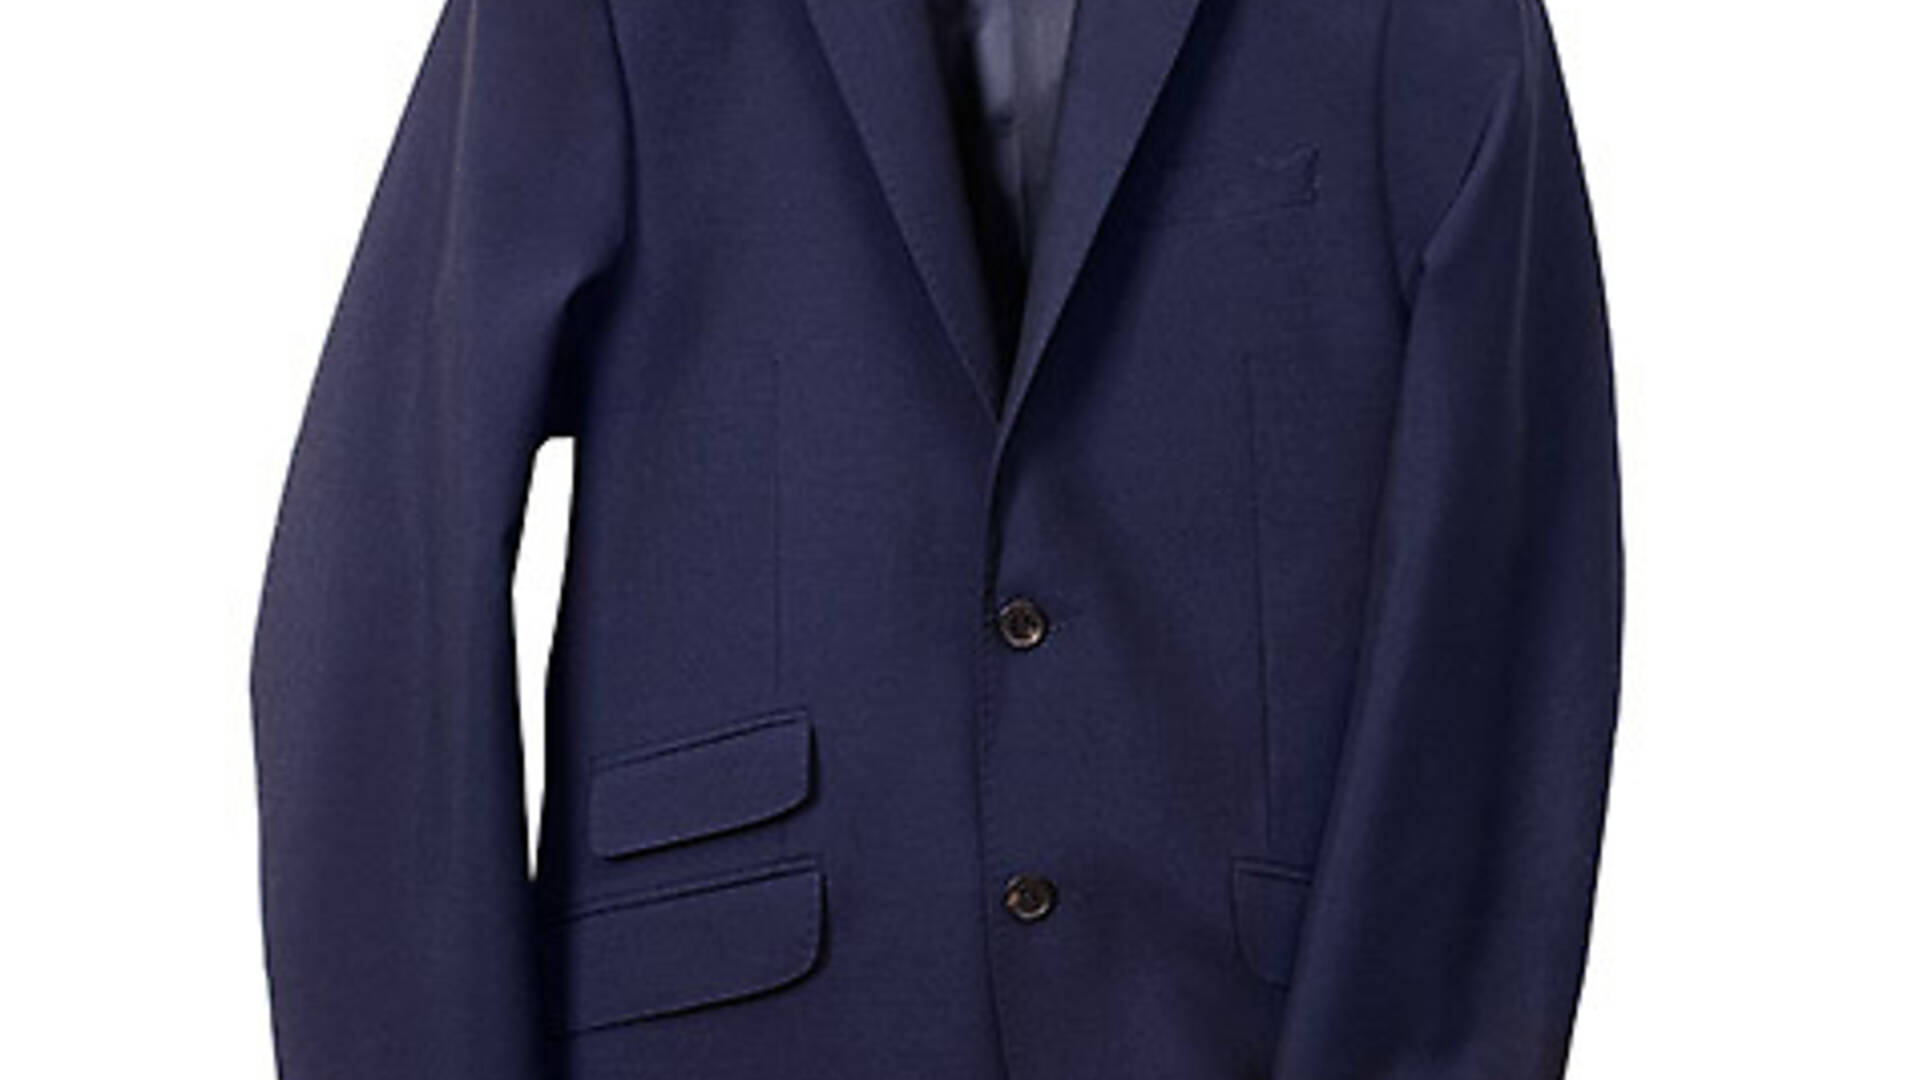 The best men’s jackets and cardigans to buy for fall 2012